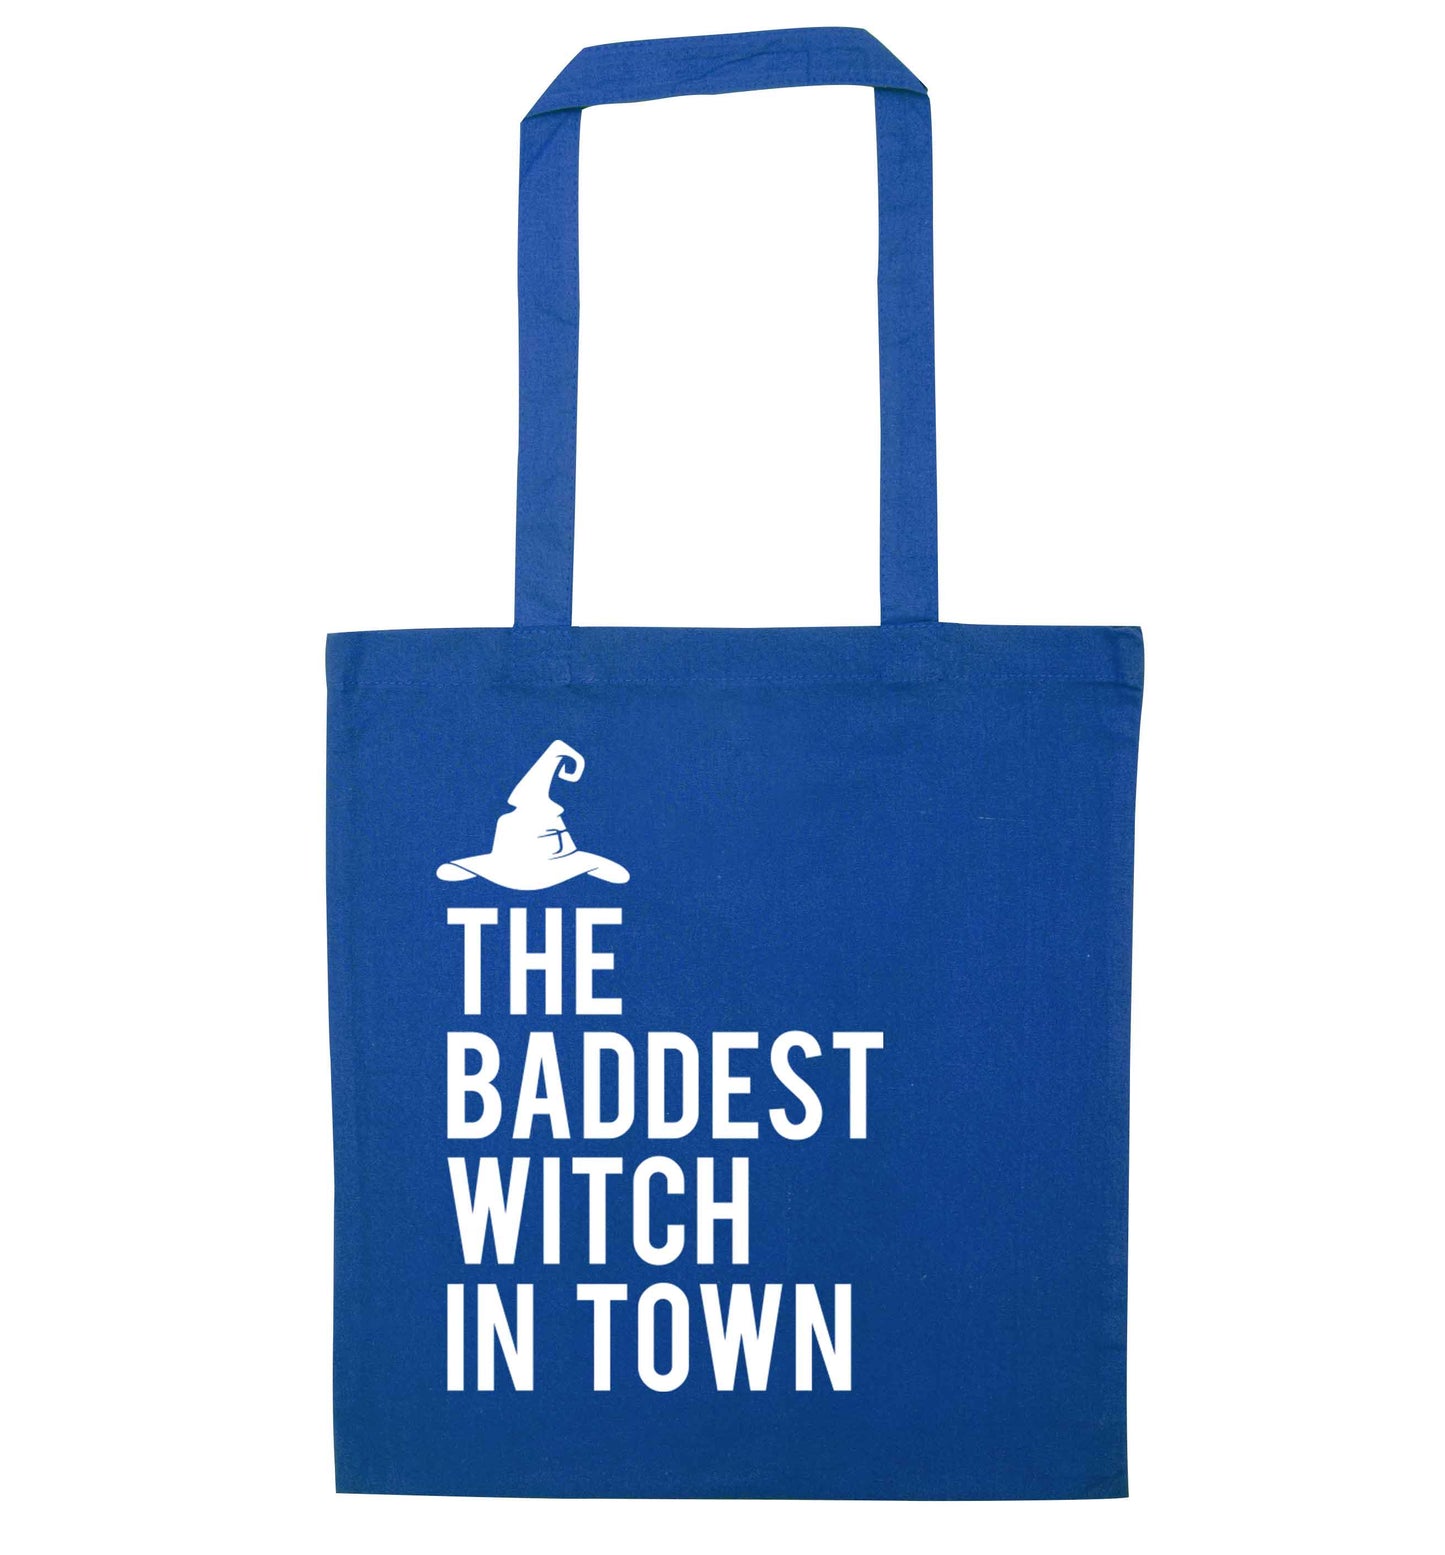 Badest witch in town blue tote bag